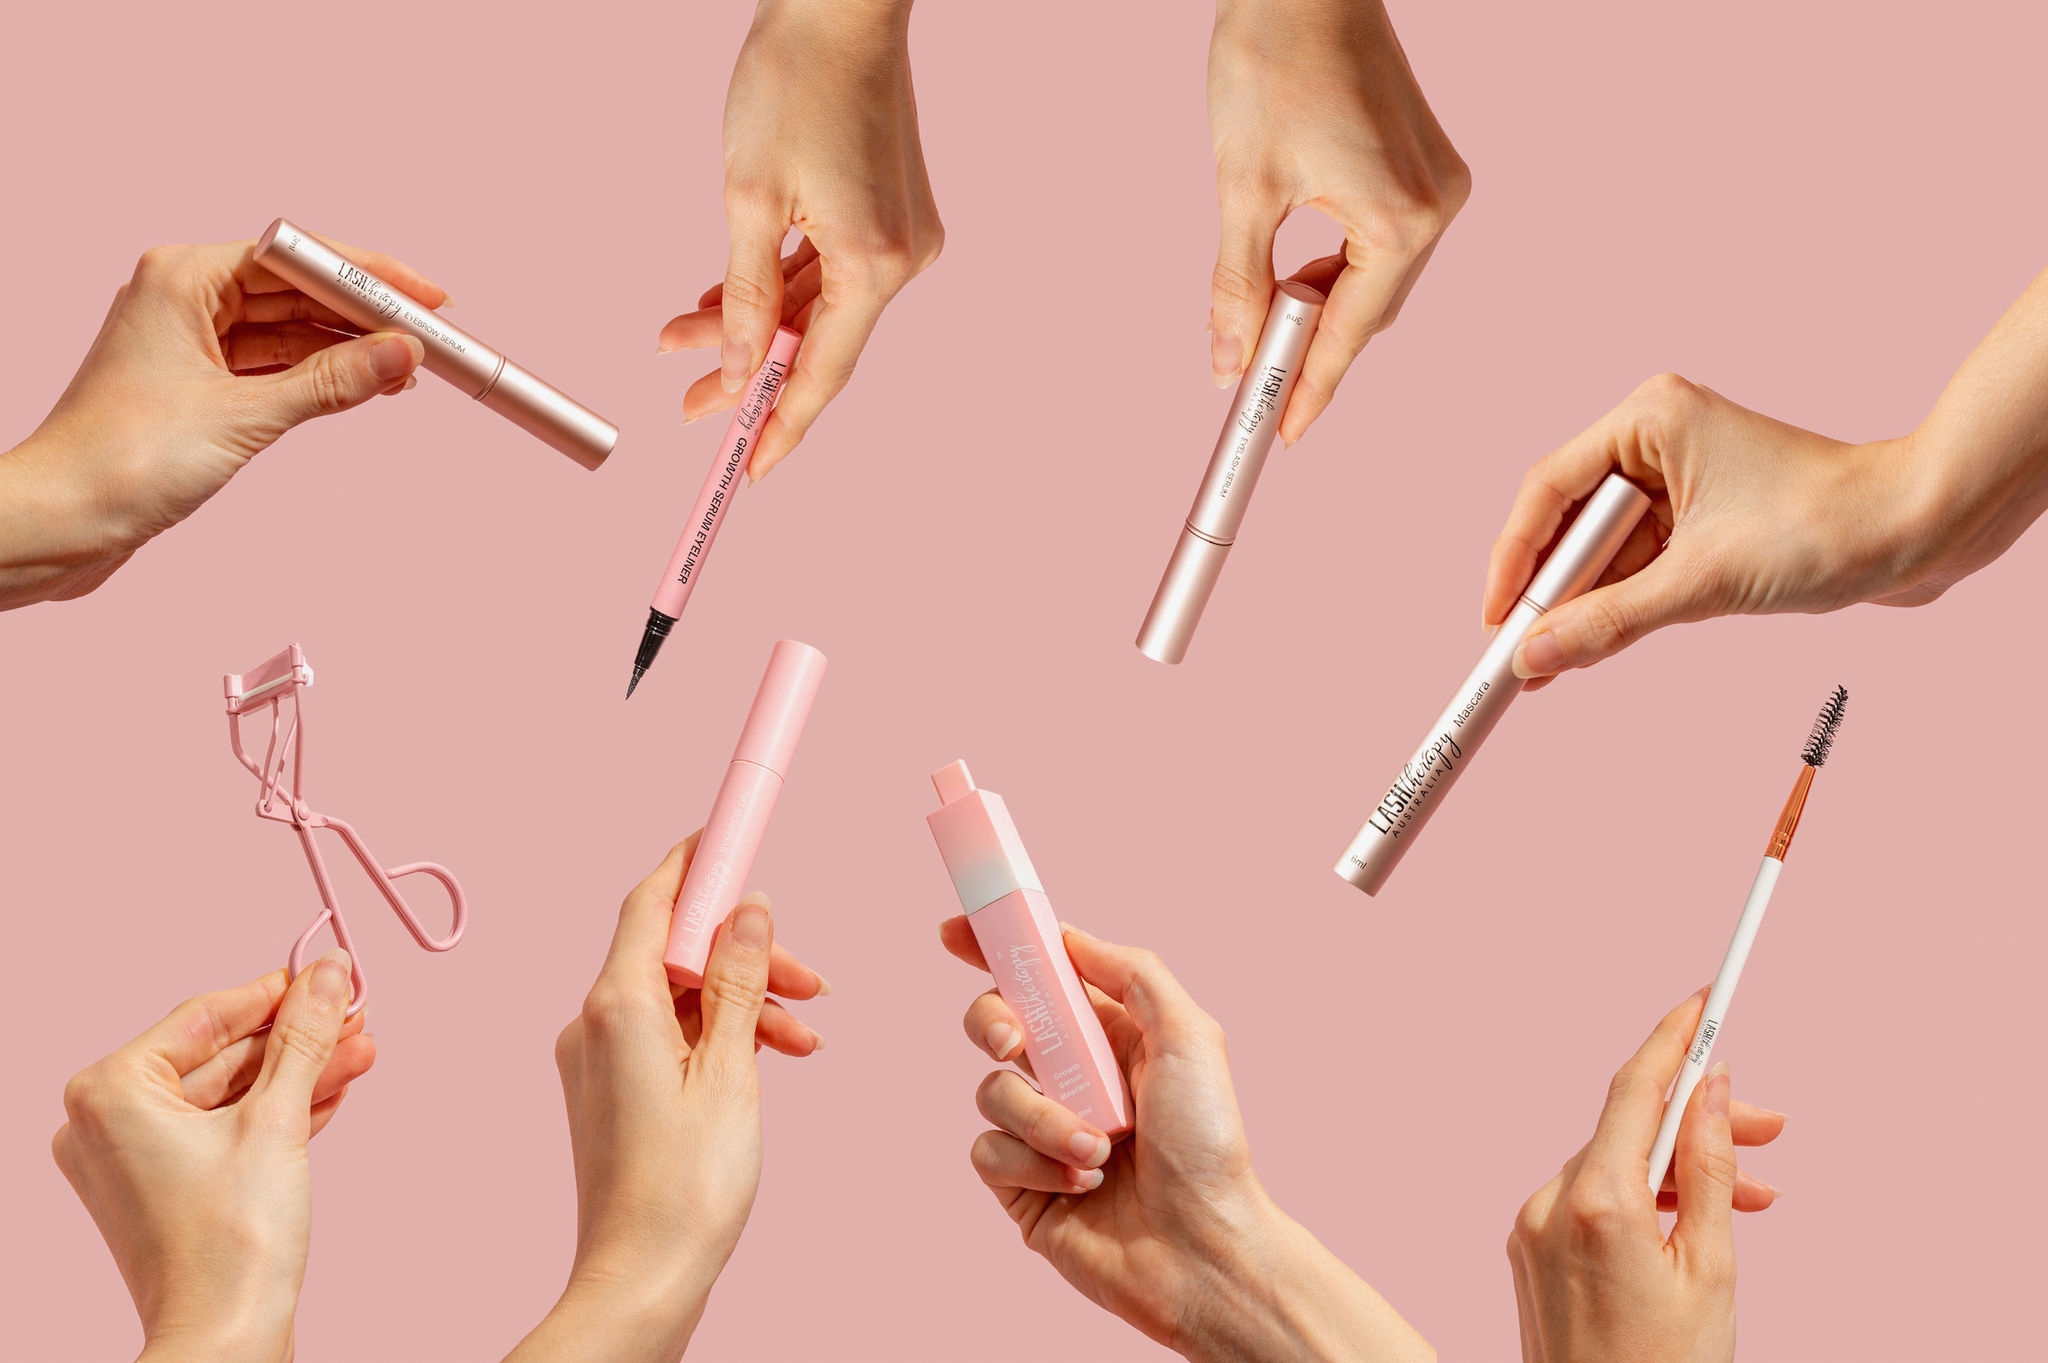 hands-showing-lash-therapy-products-over-pink-background